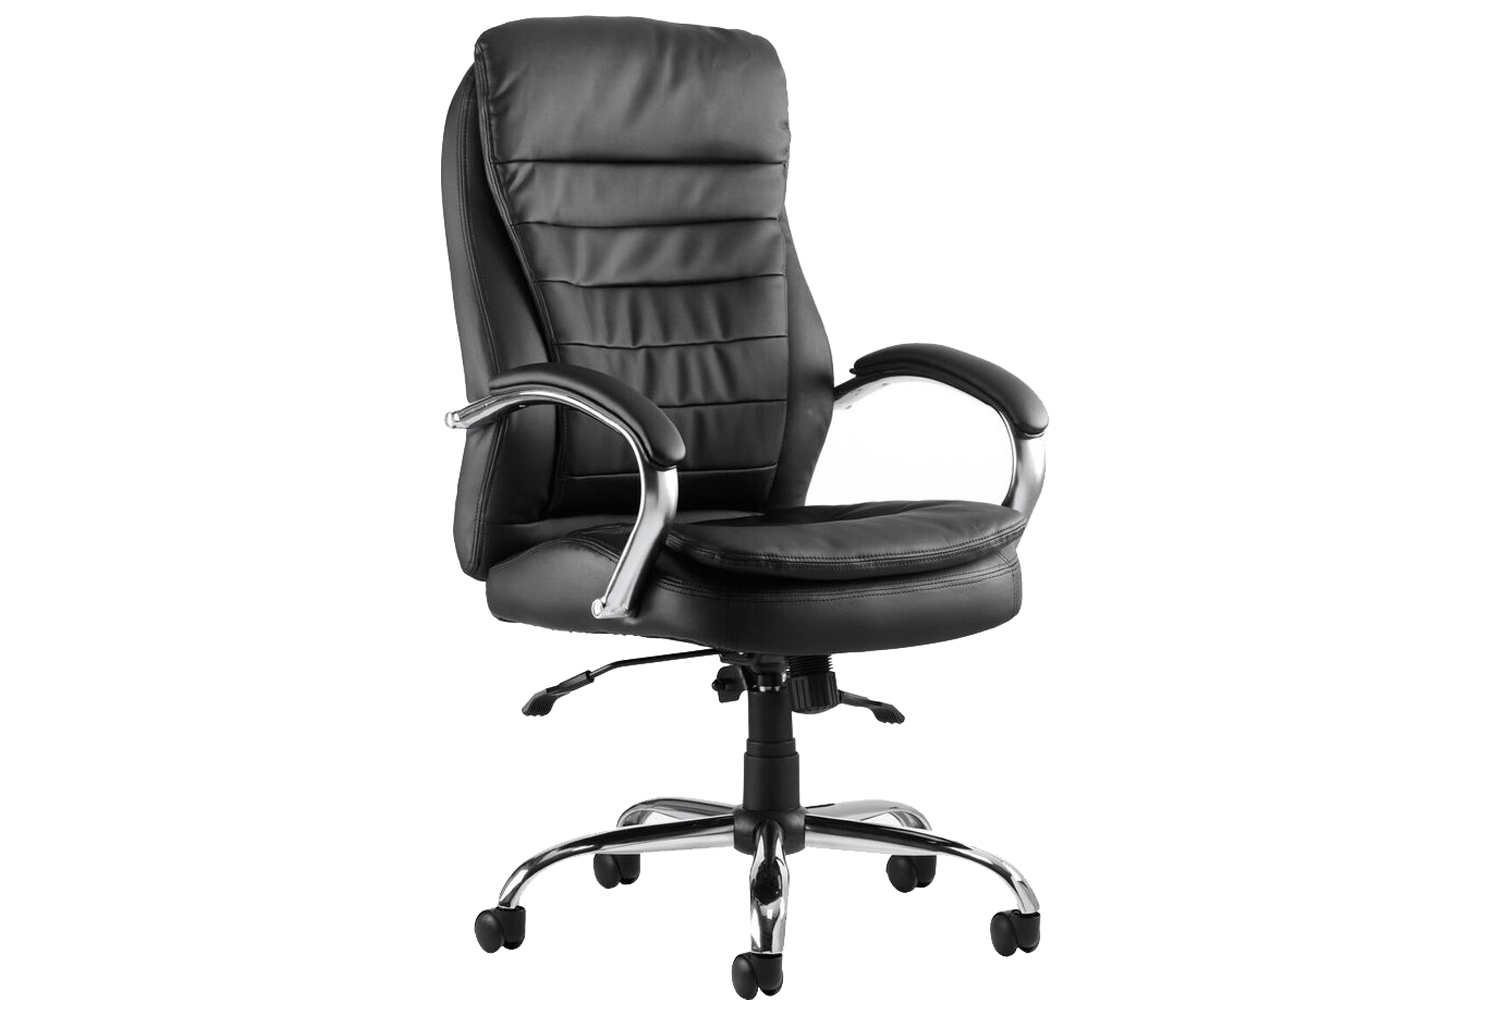 Babel High Back Leather Executive Office Chair Black, Black, Express Delivery